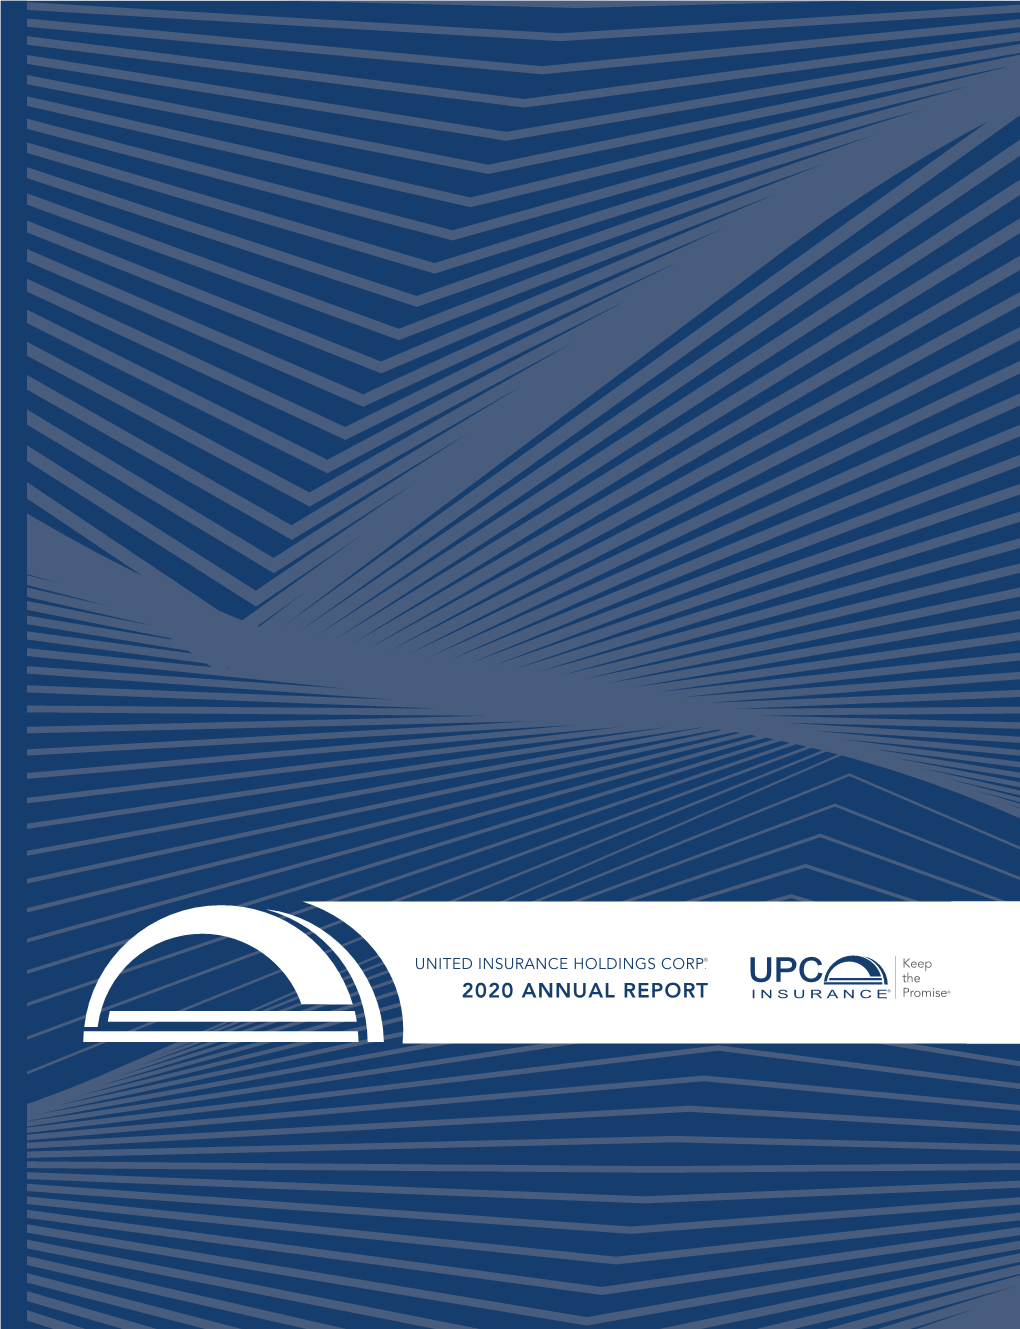 2020 Annual Report ® United Insurance Holdings Corp